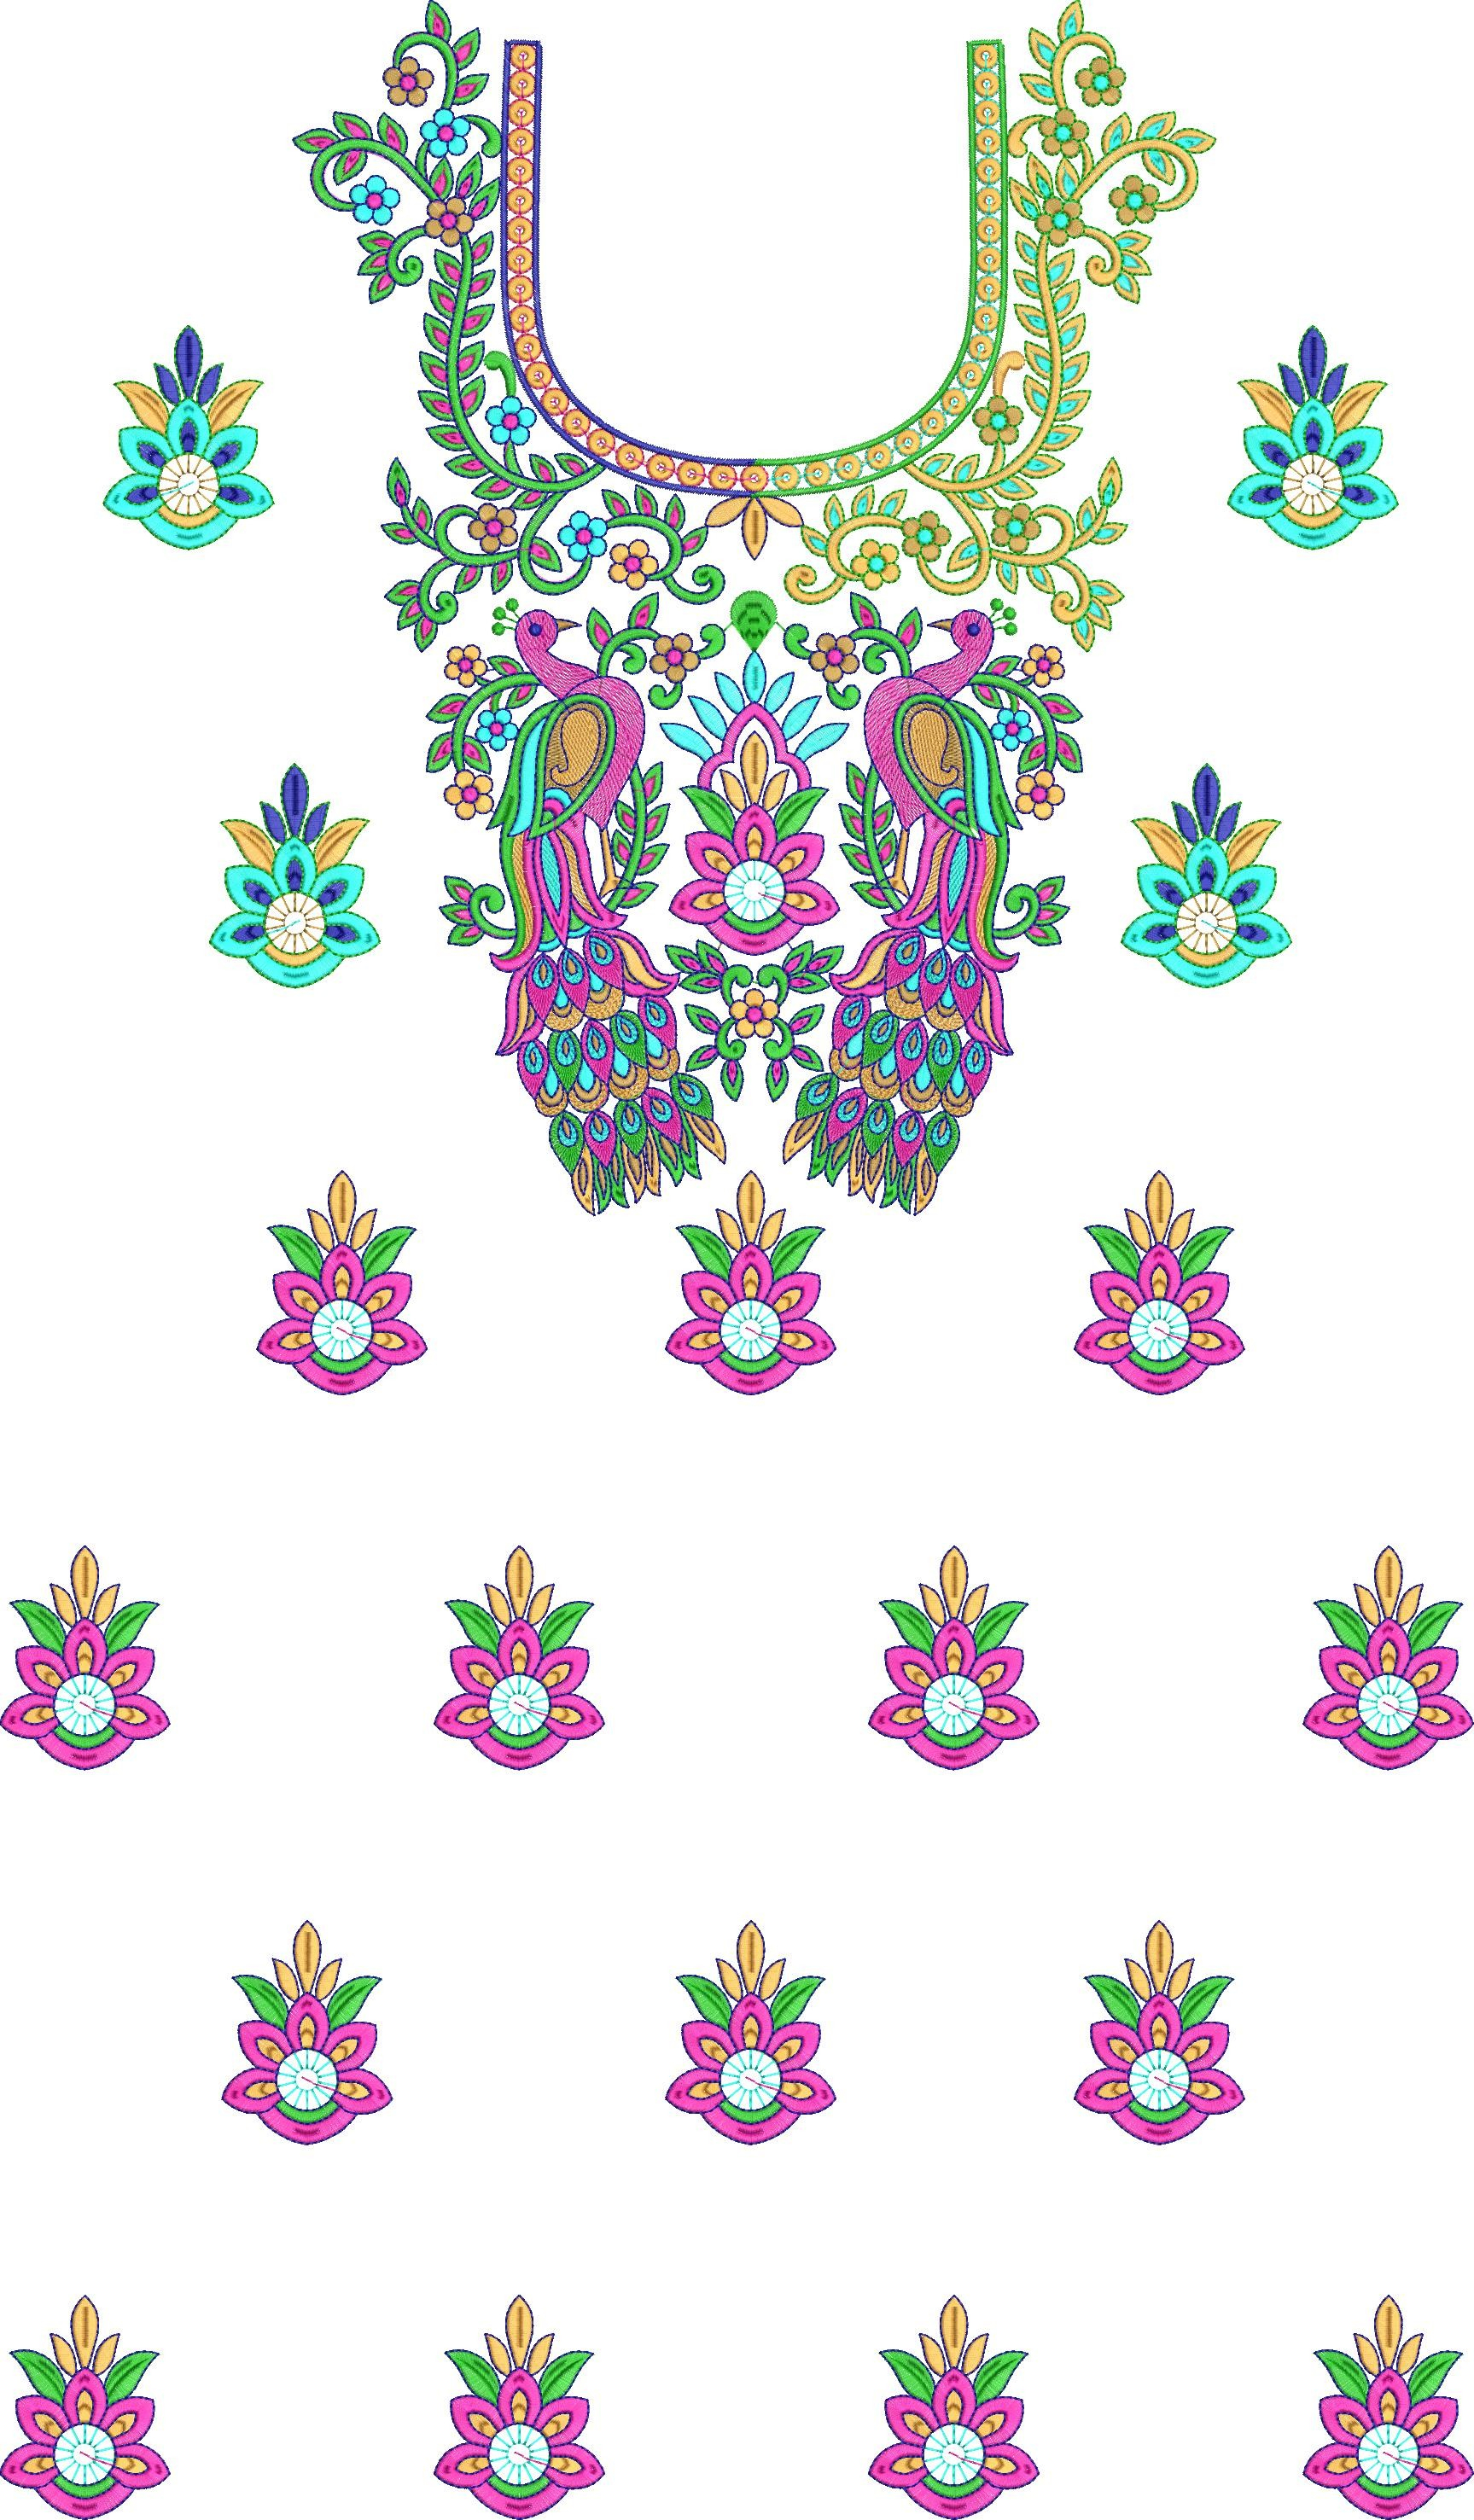 Peacock Embroidery Pattern Full Dress Peacock Embroidery Designs Embroideryshristi